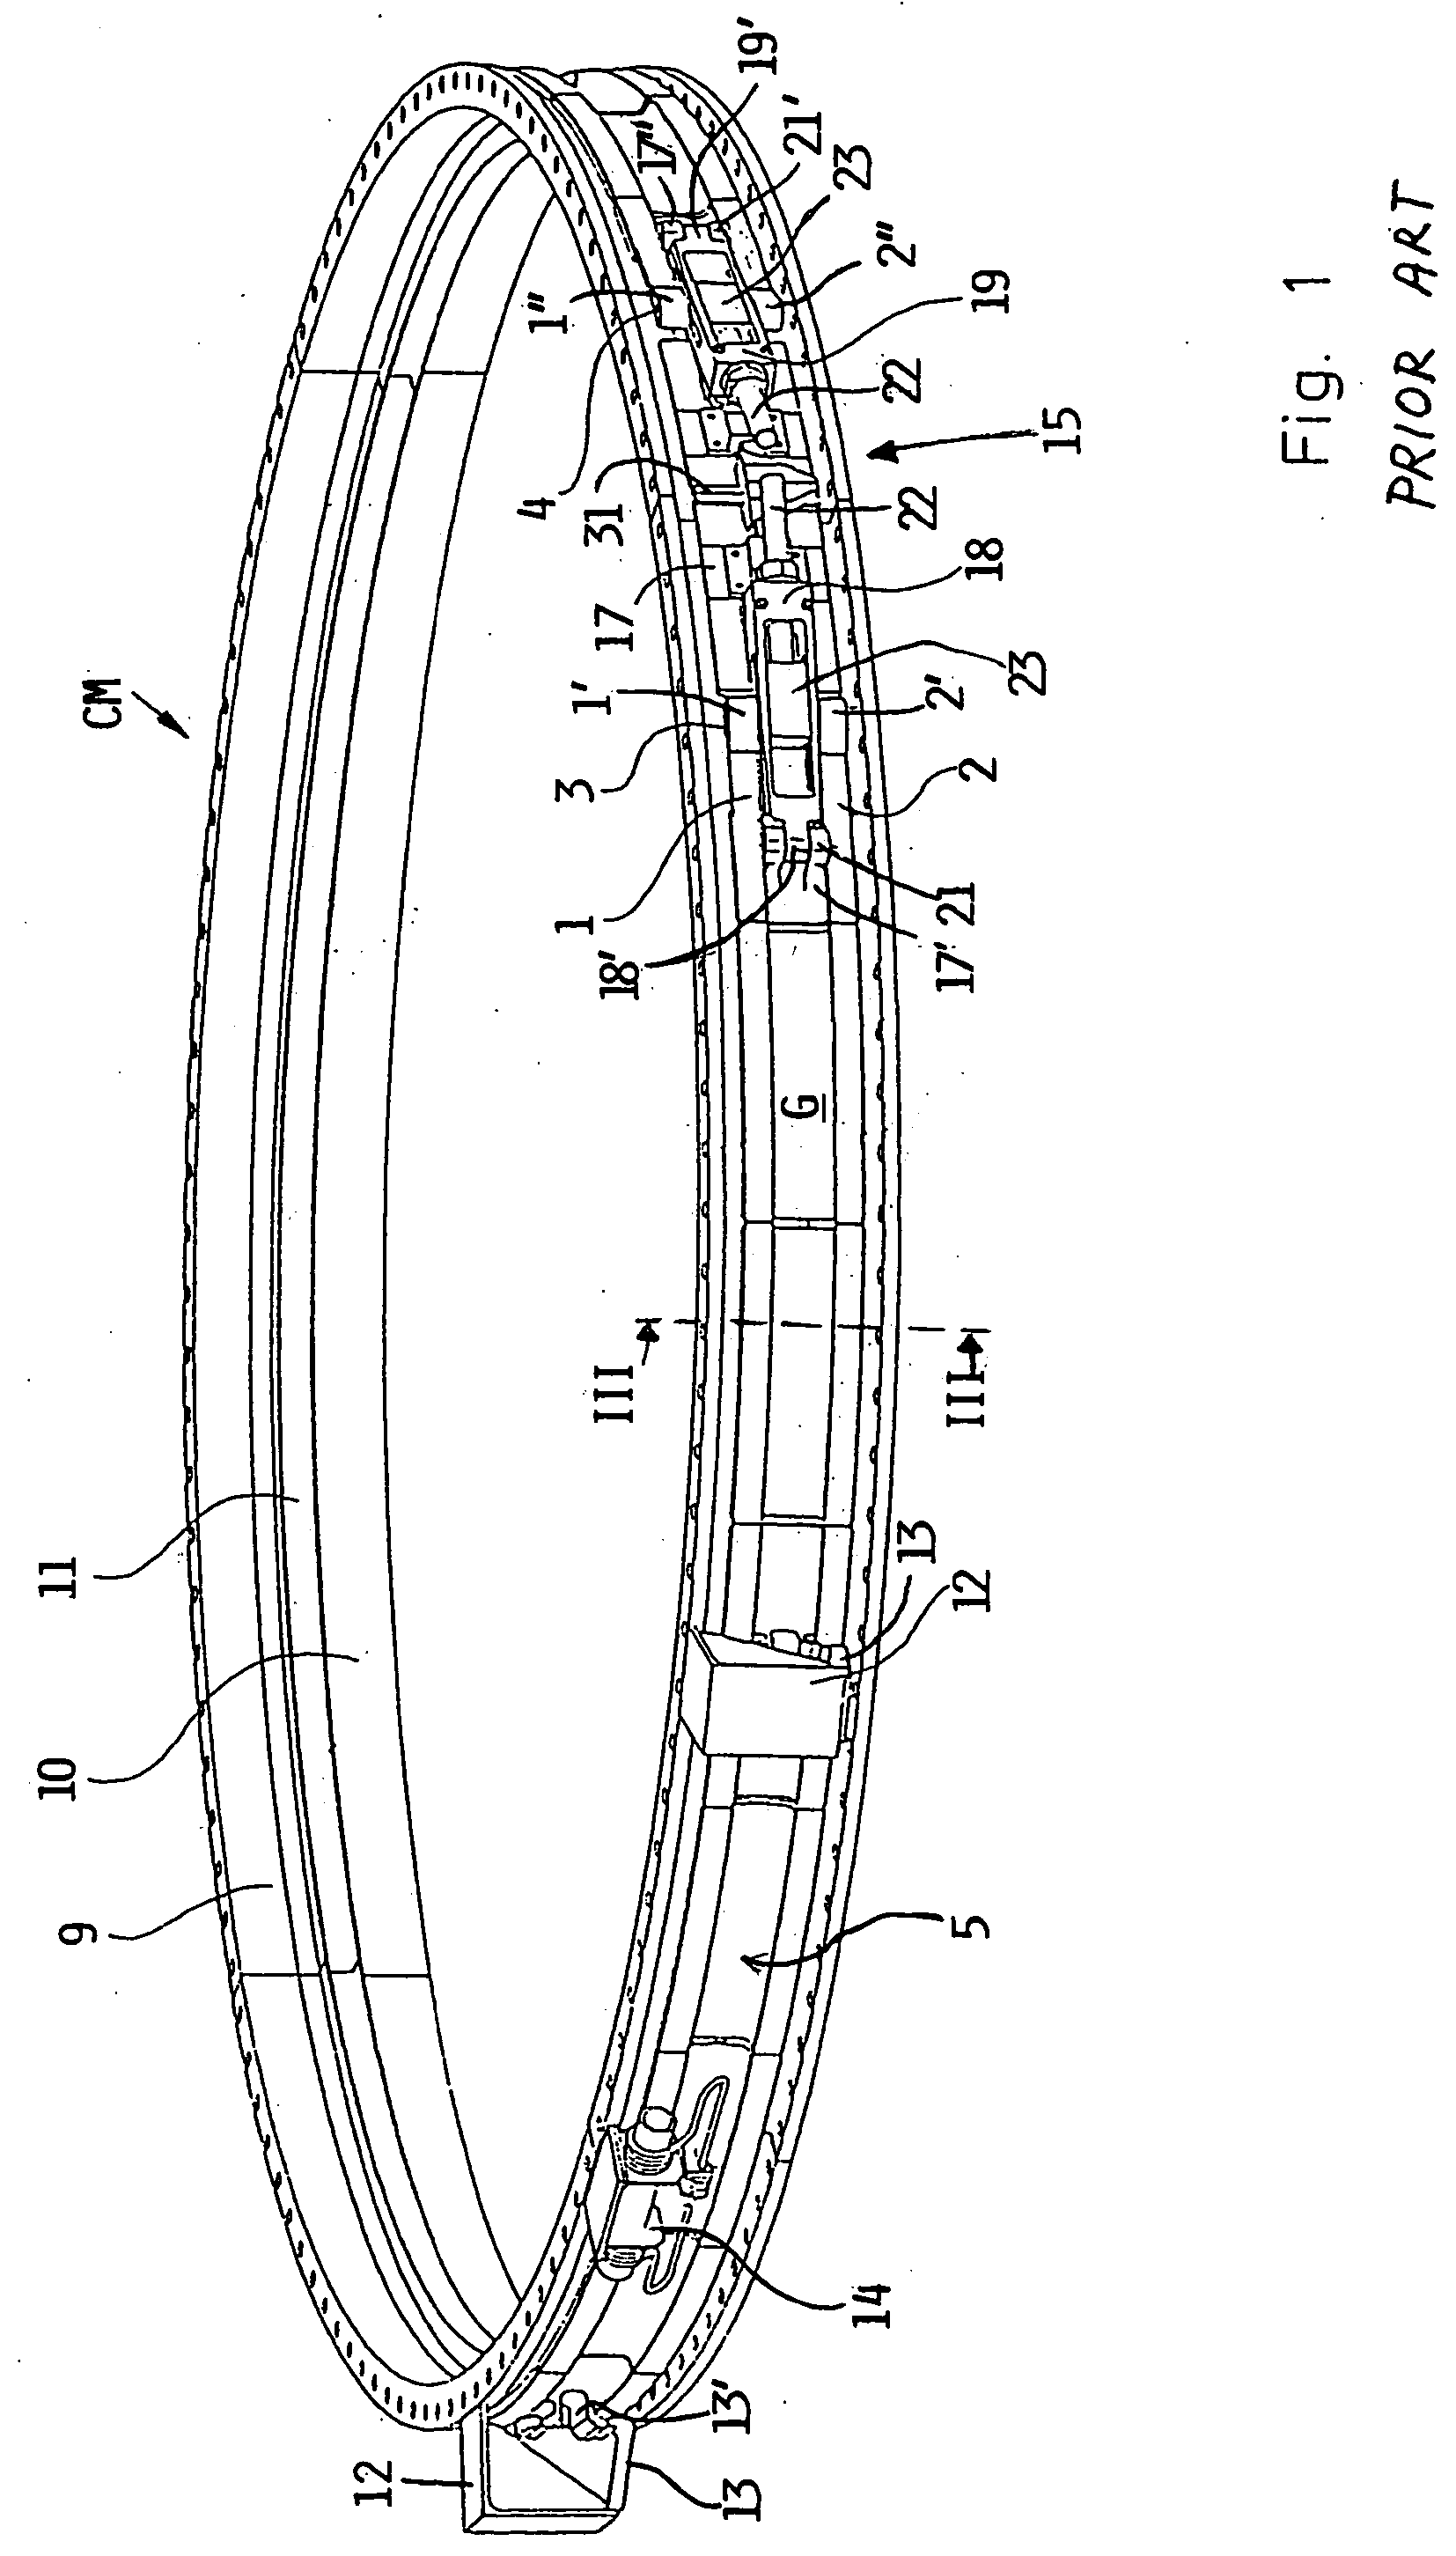 Apparatus for releasably interconnecting structural components having a rotational symmetry